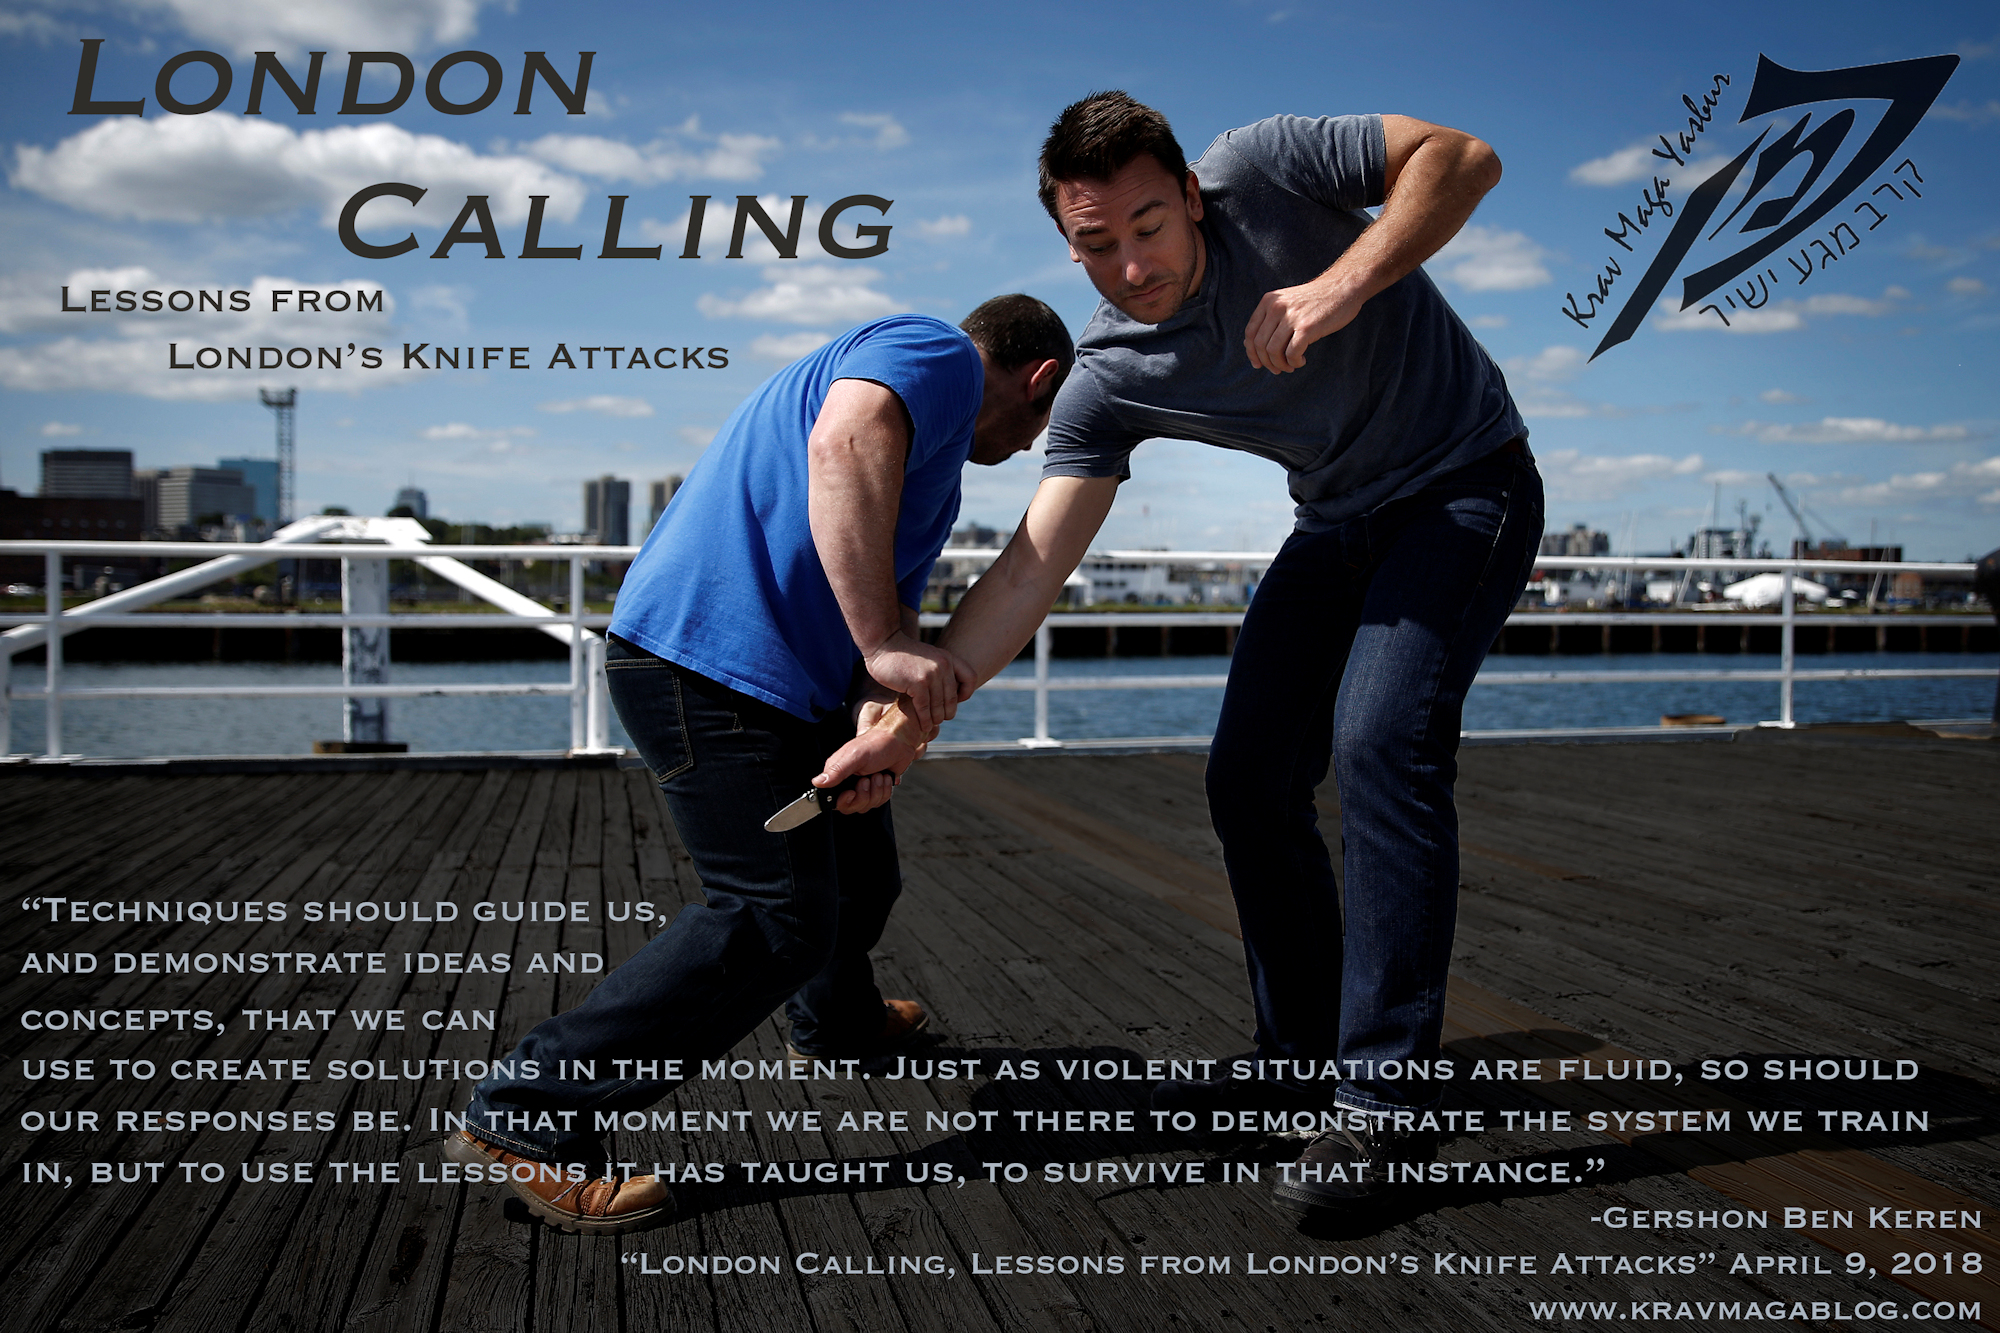 Blog About London Calling - Lessons We Can Learn From London's Knife Attacks